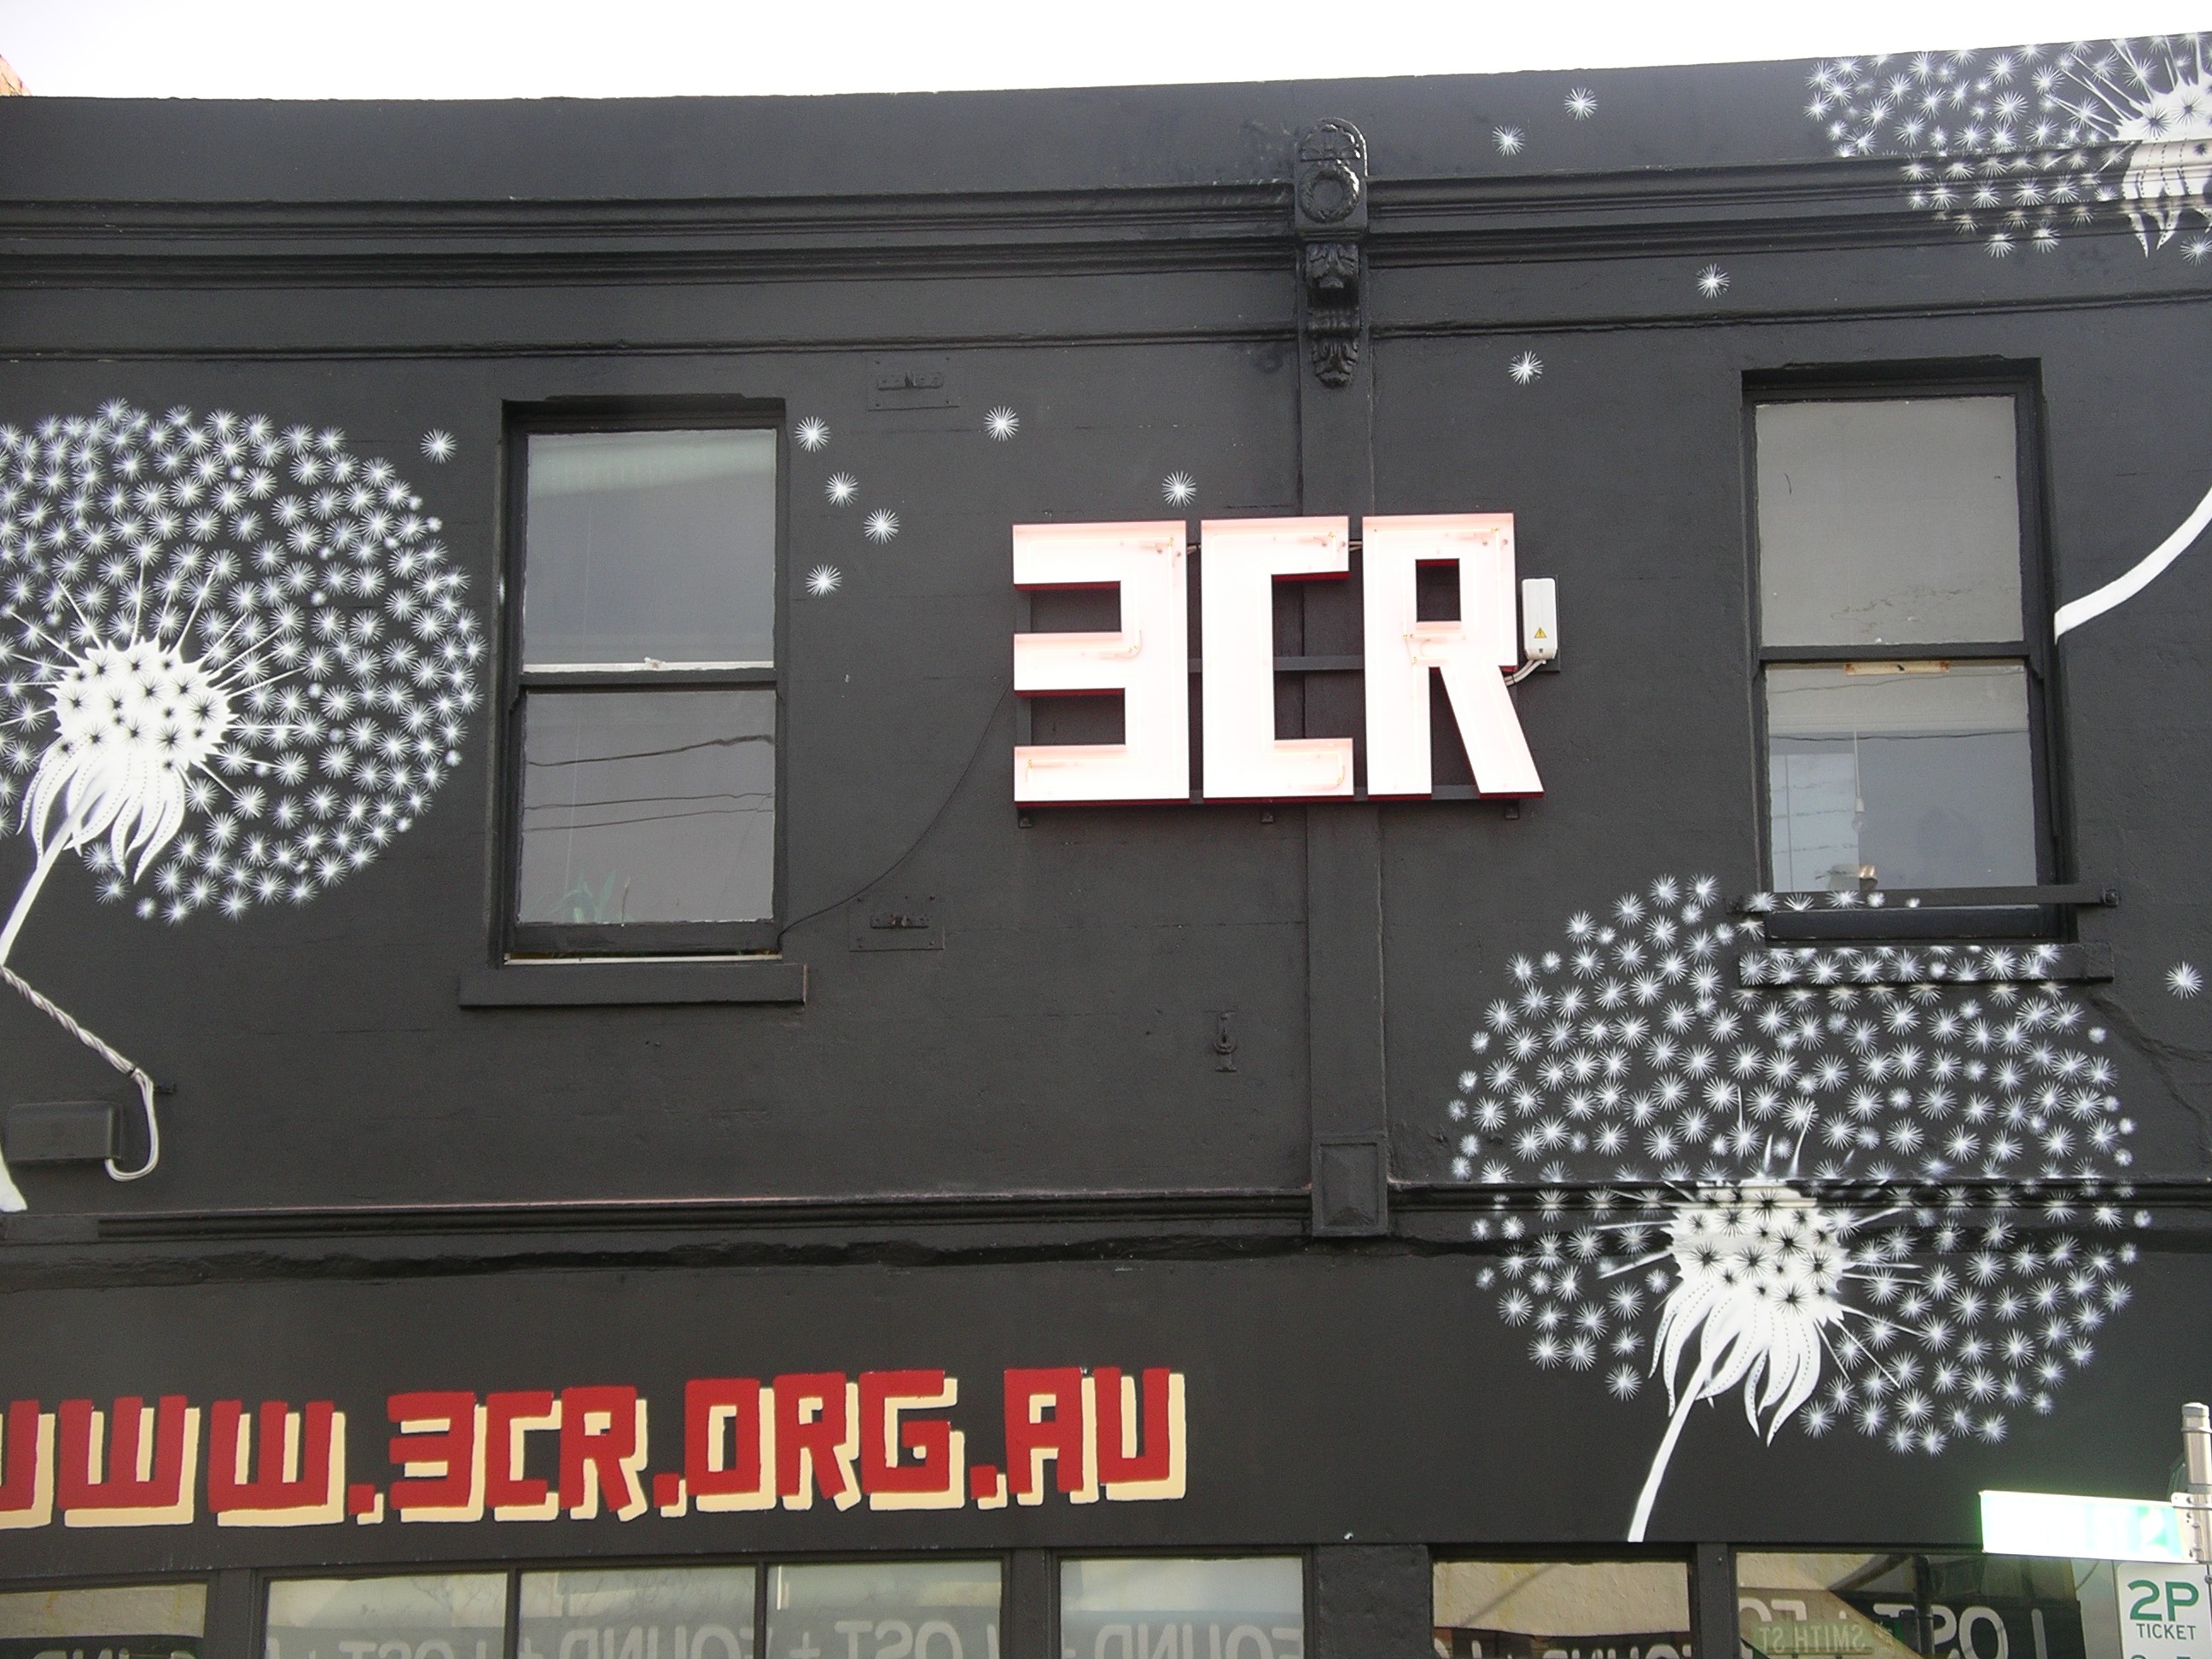 The front of the 3CR building, with large dandelion murals and a neon sign which reads 3CR in block letters.